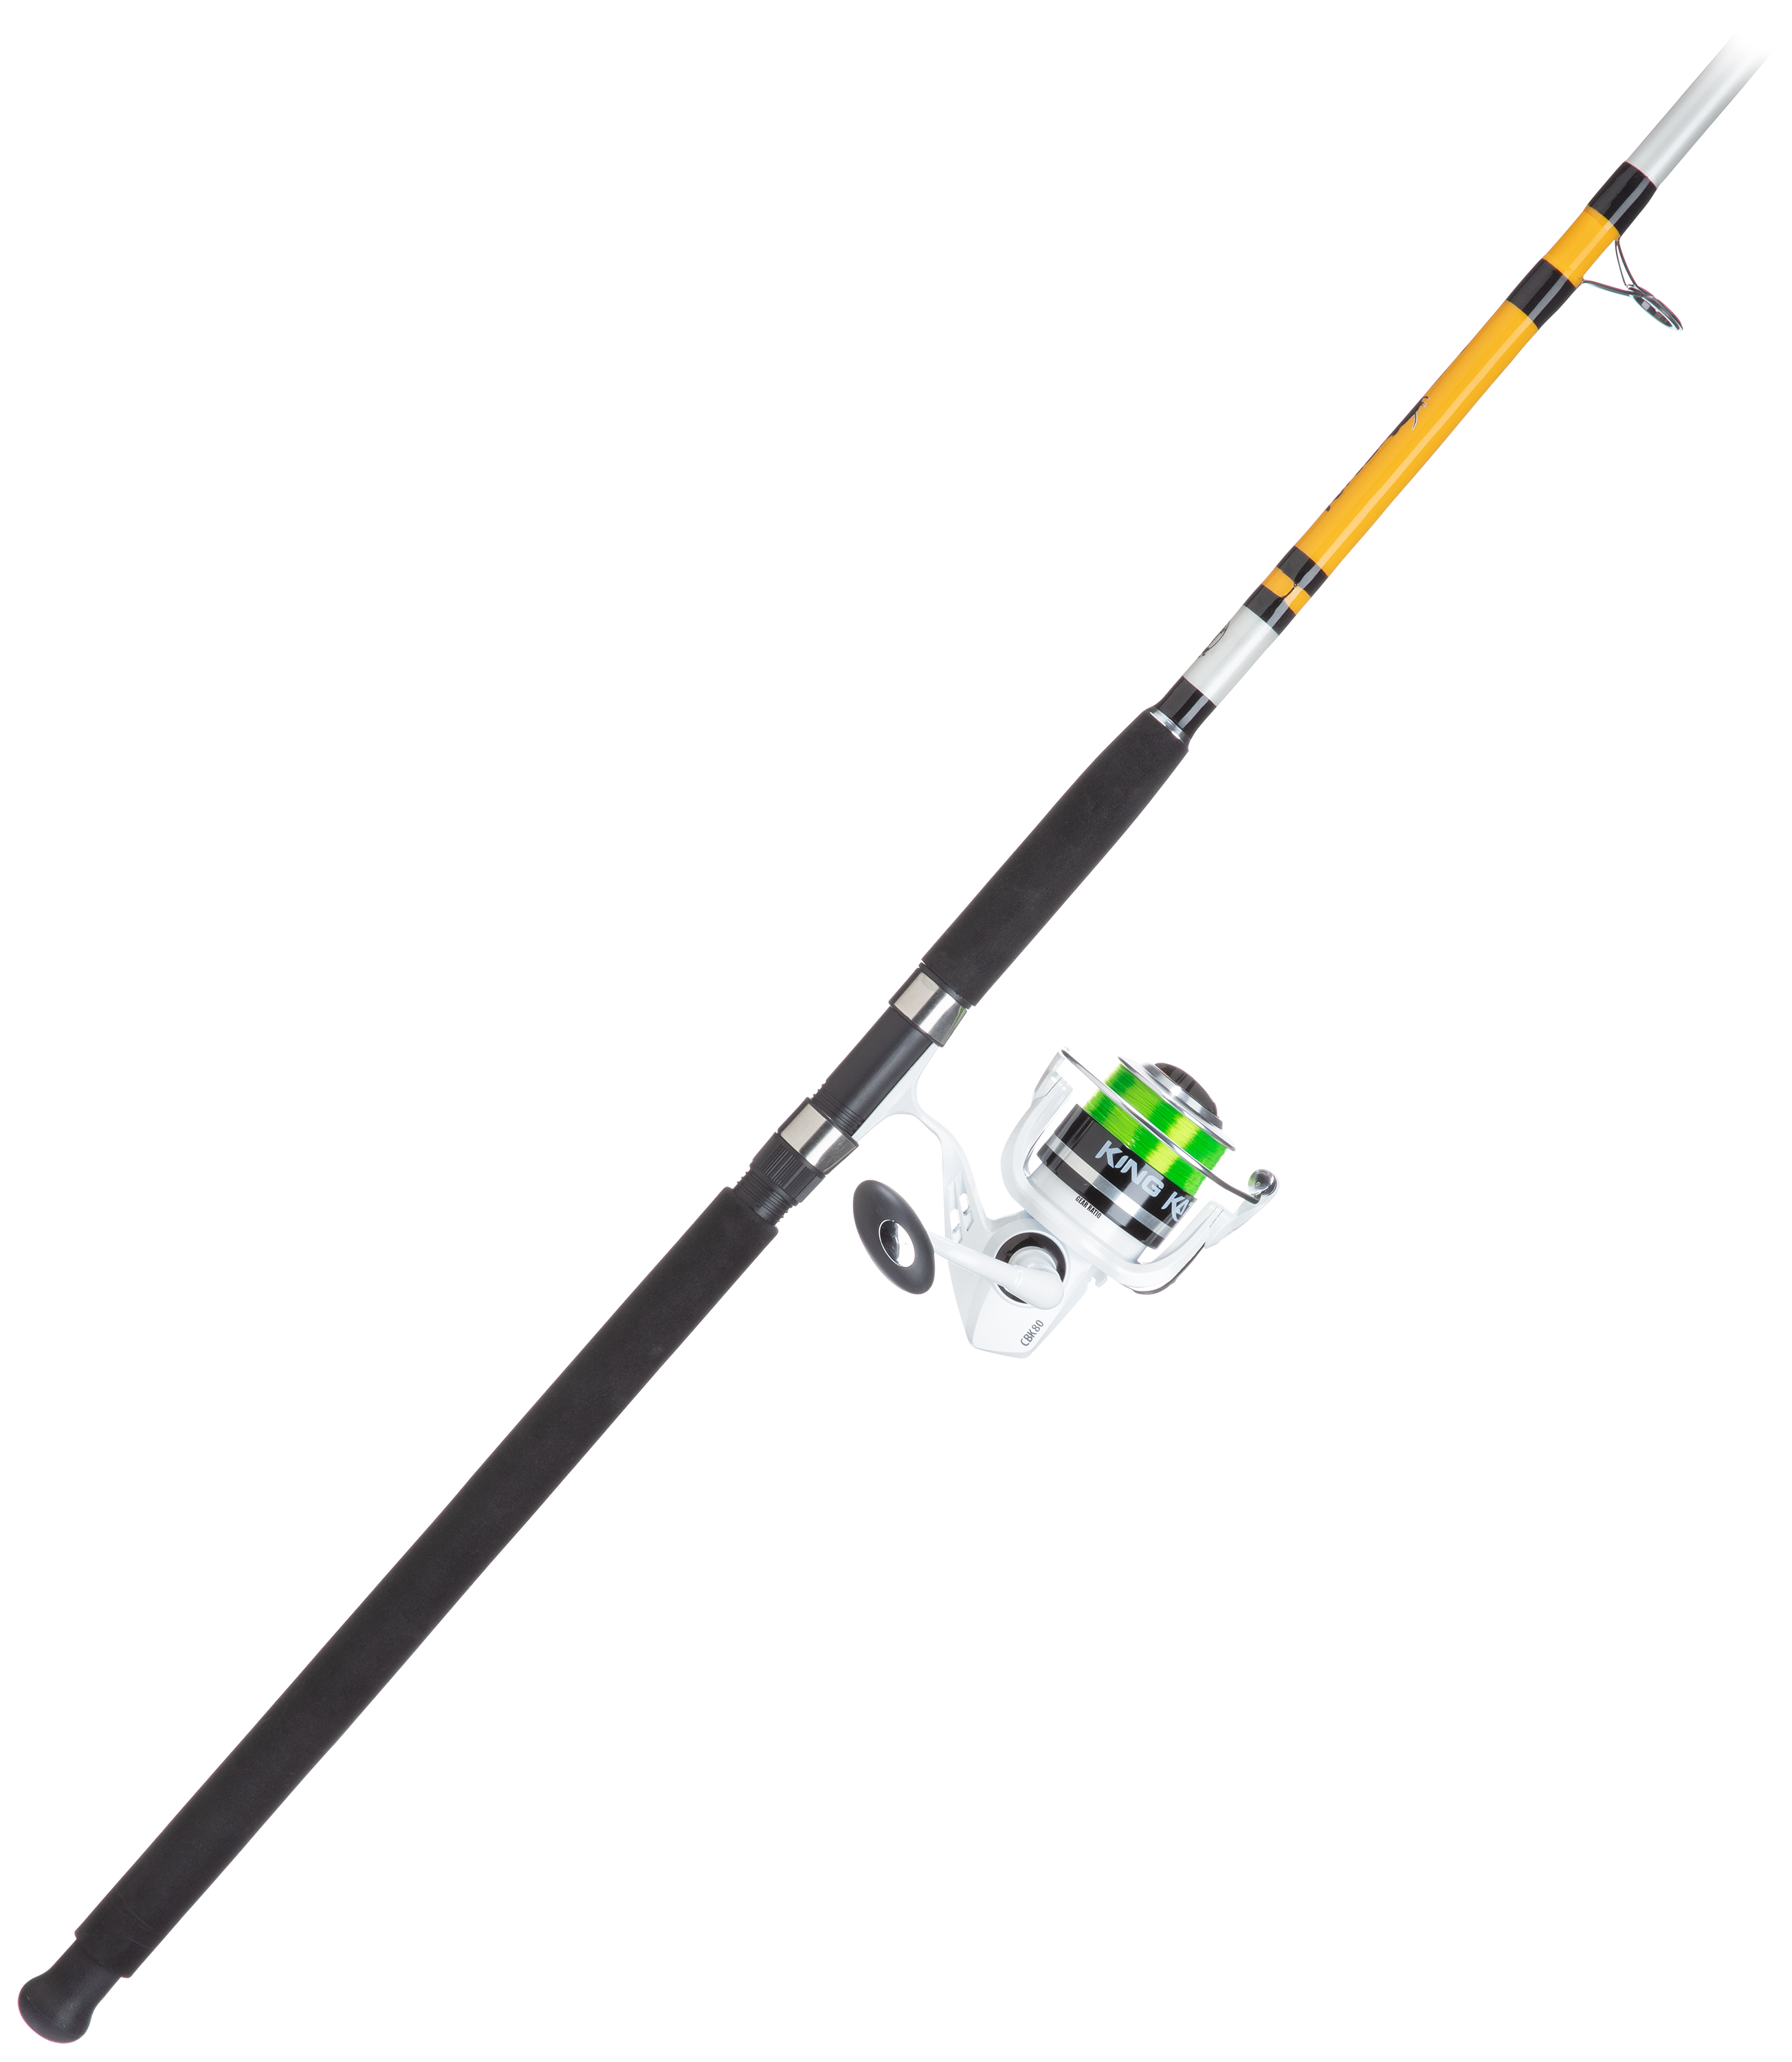 Shakespeare Catch More Fish Spinning Rod and Reel Combo for Lake